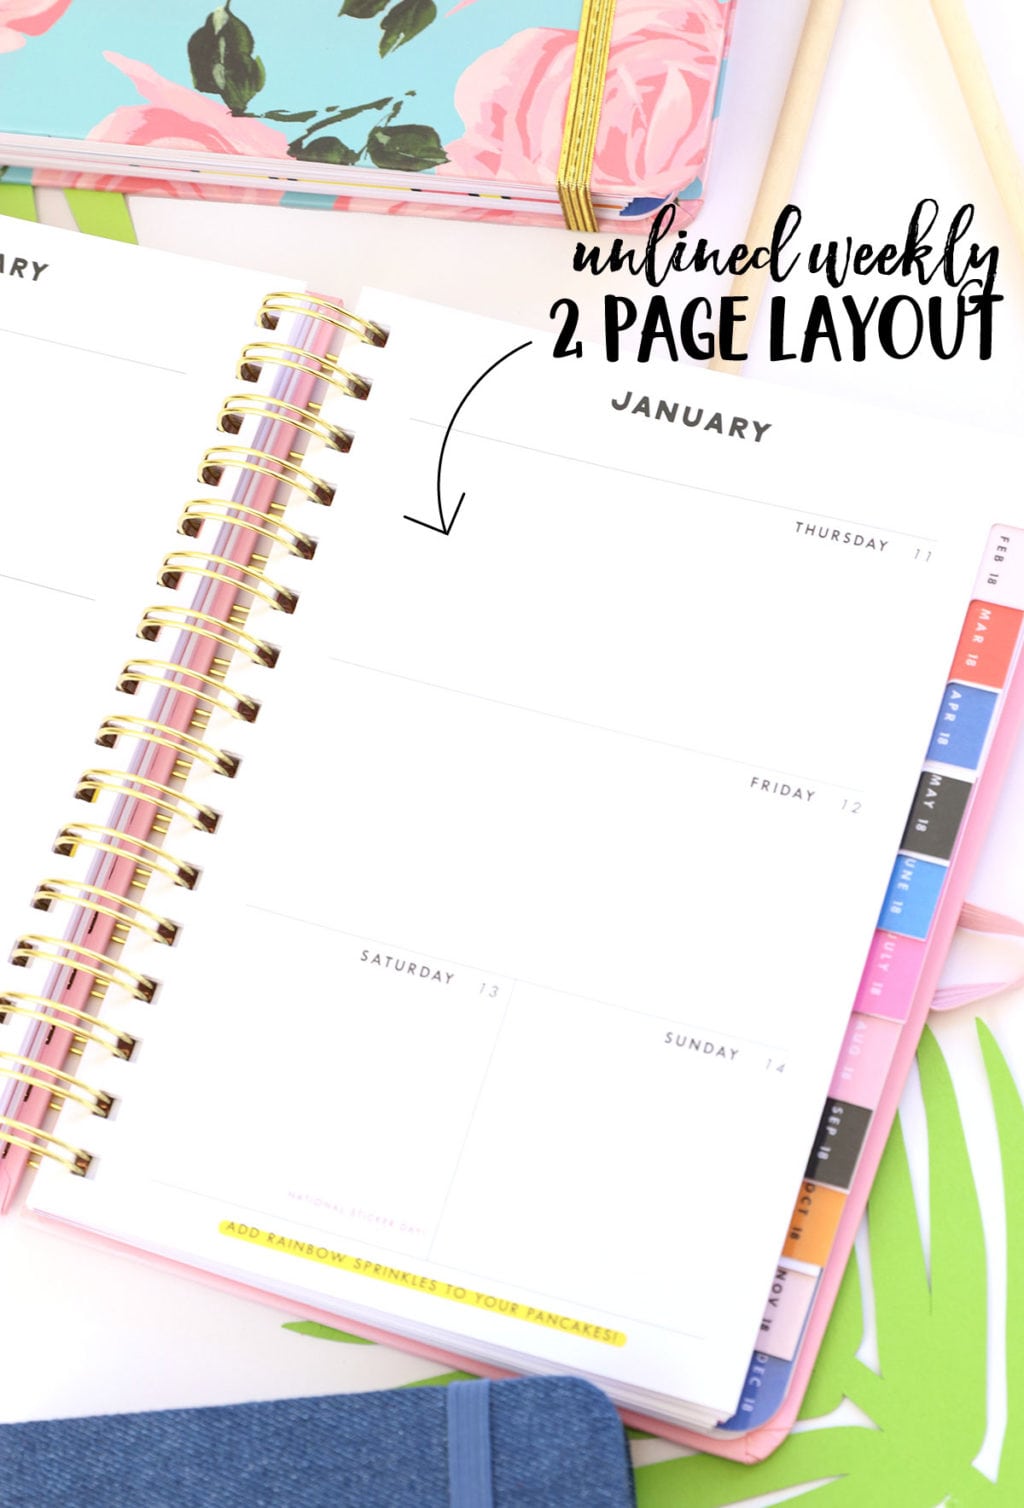 SHOP BAN.DO Planner Review | damask love